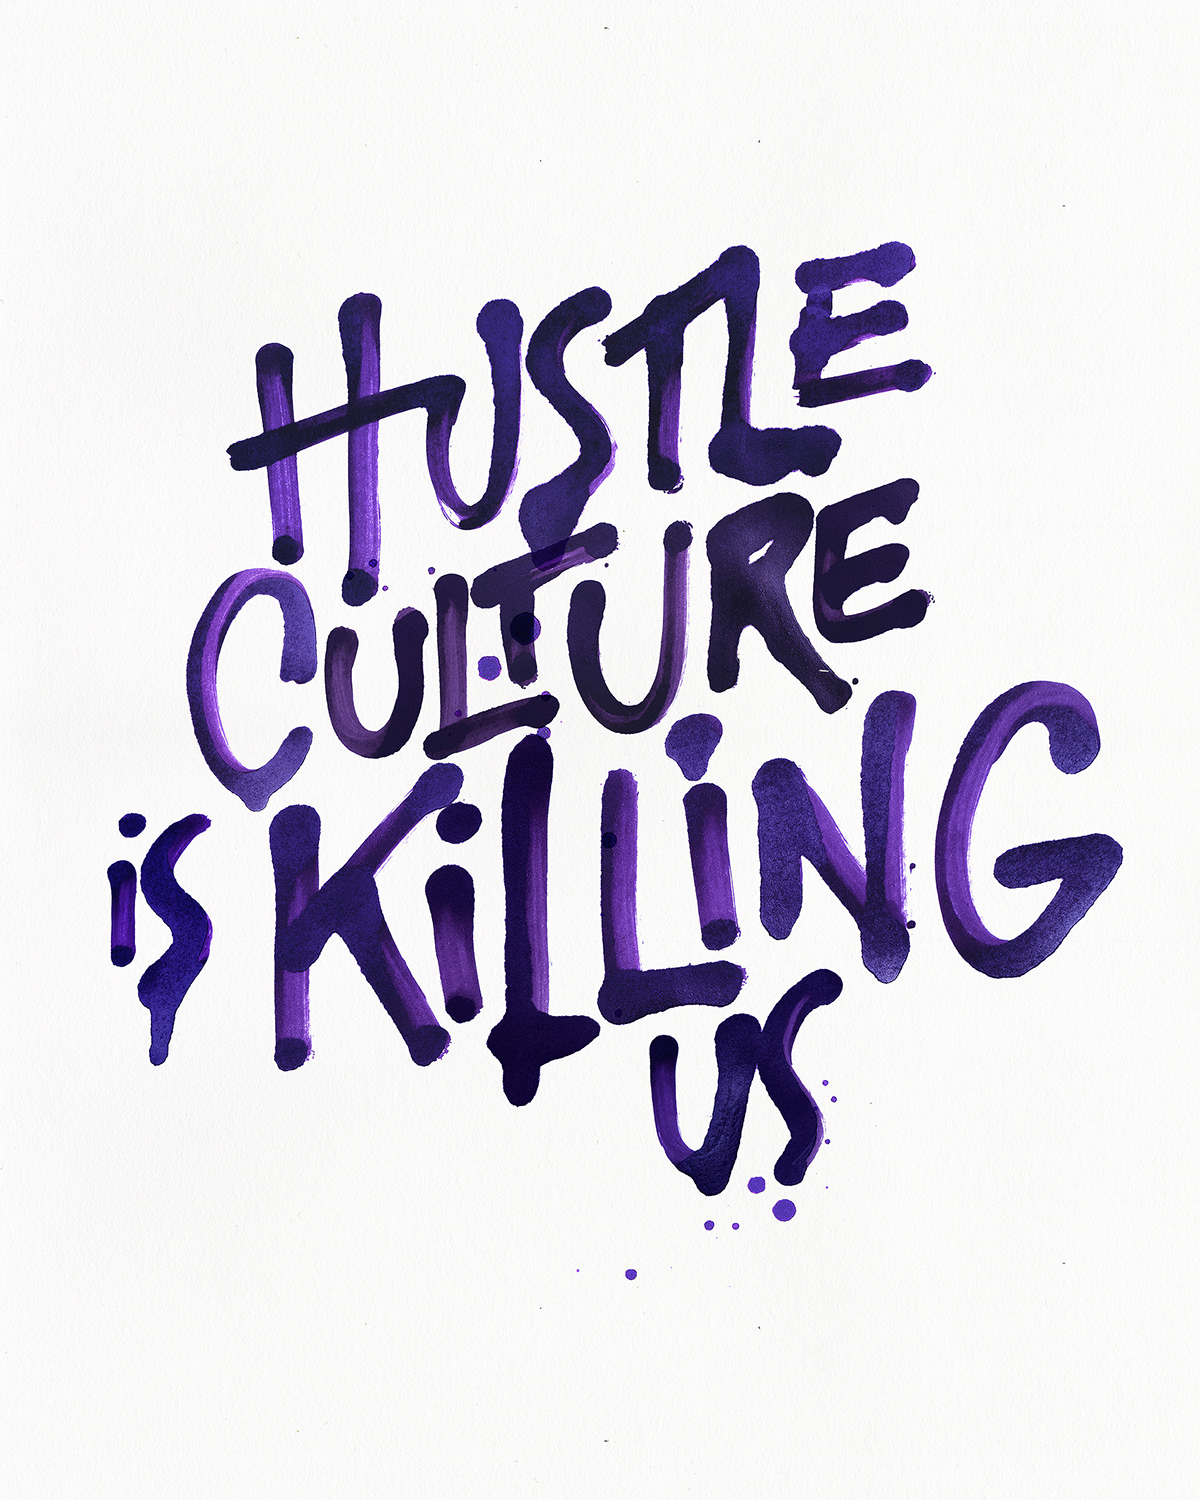 Advertising  campaign Graffiti hustle hustleculture lettering Lettering Design poster type typography  